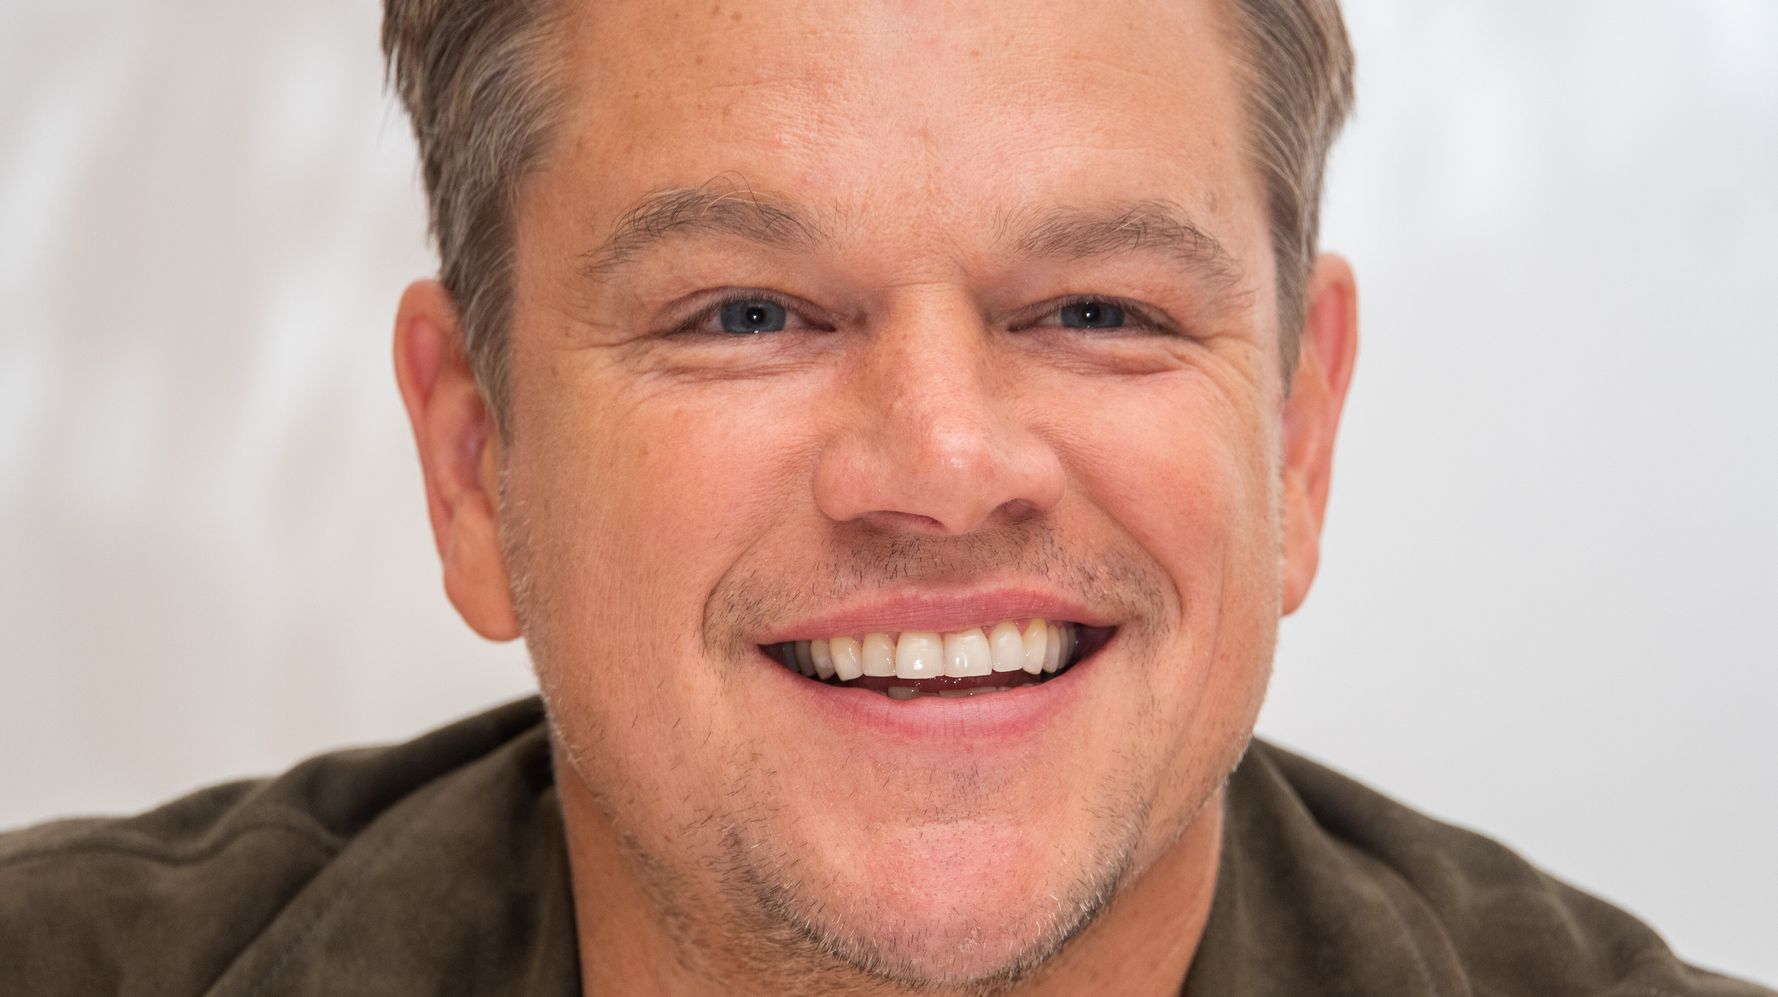 Matt Damon's Daughter Won't Watch 'Good Will Hunting' For One Very Teenager-y Reason